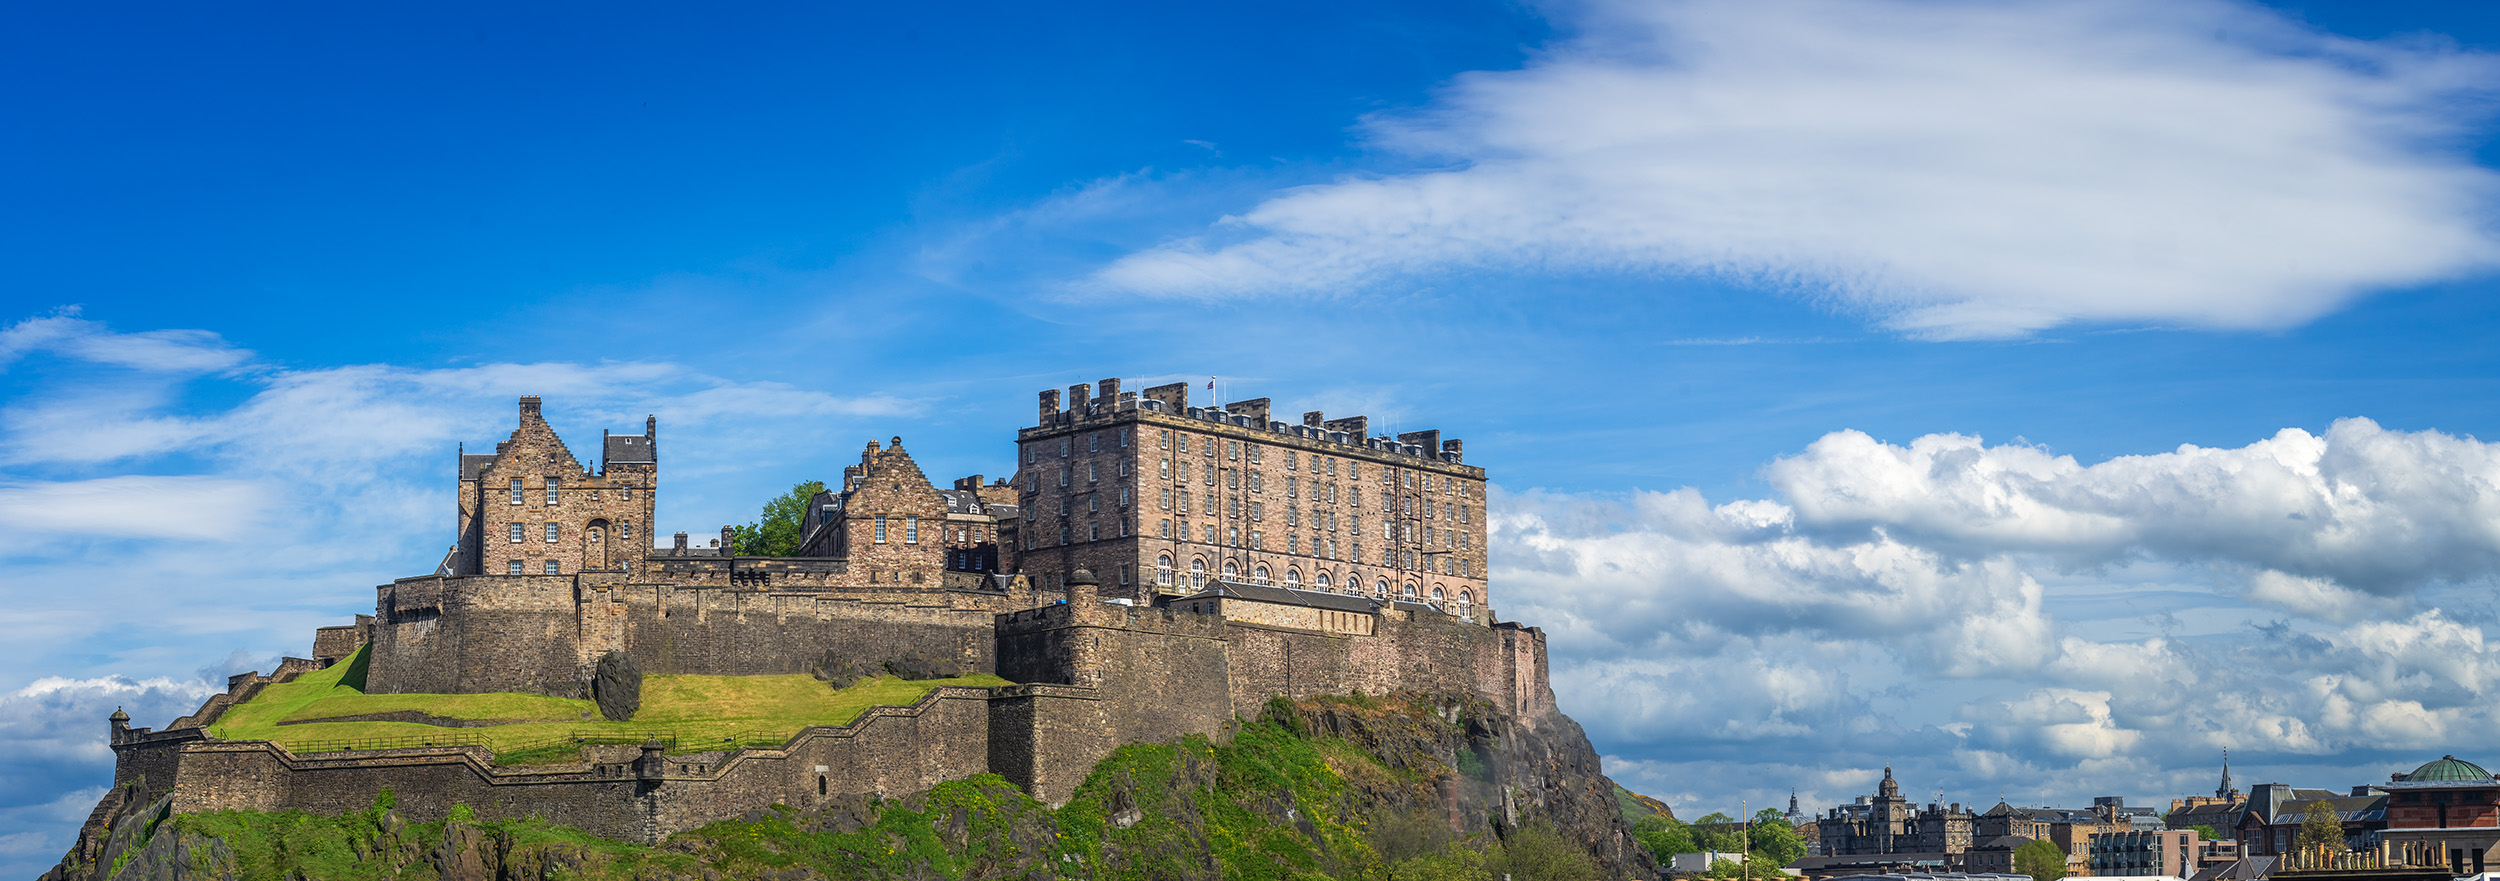 This stitched panoramic image presents the commanding Edinburgh Castle, captured from the window of our room at the Waldorf Astoria...